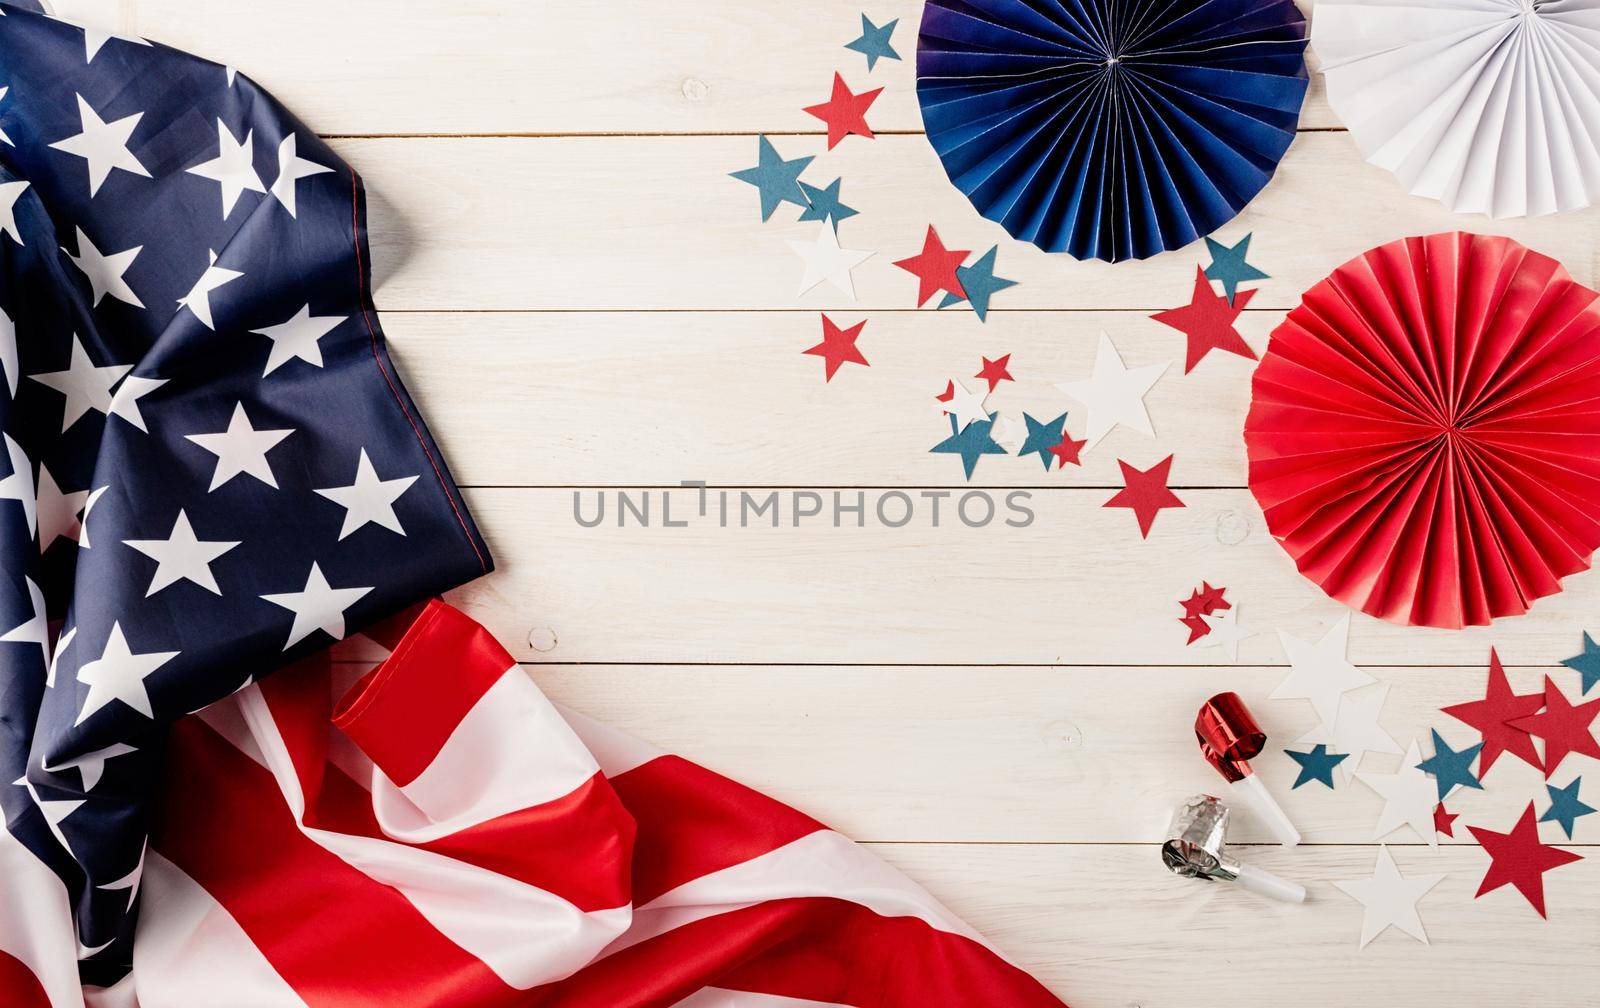 Decorations for 4th July, Independence Day USA. Paper fans, national flag, stars and noisemakers on white wooden background. Copy space, flat lay